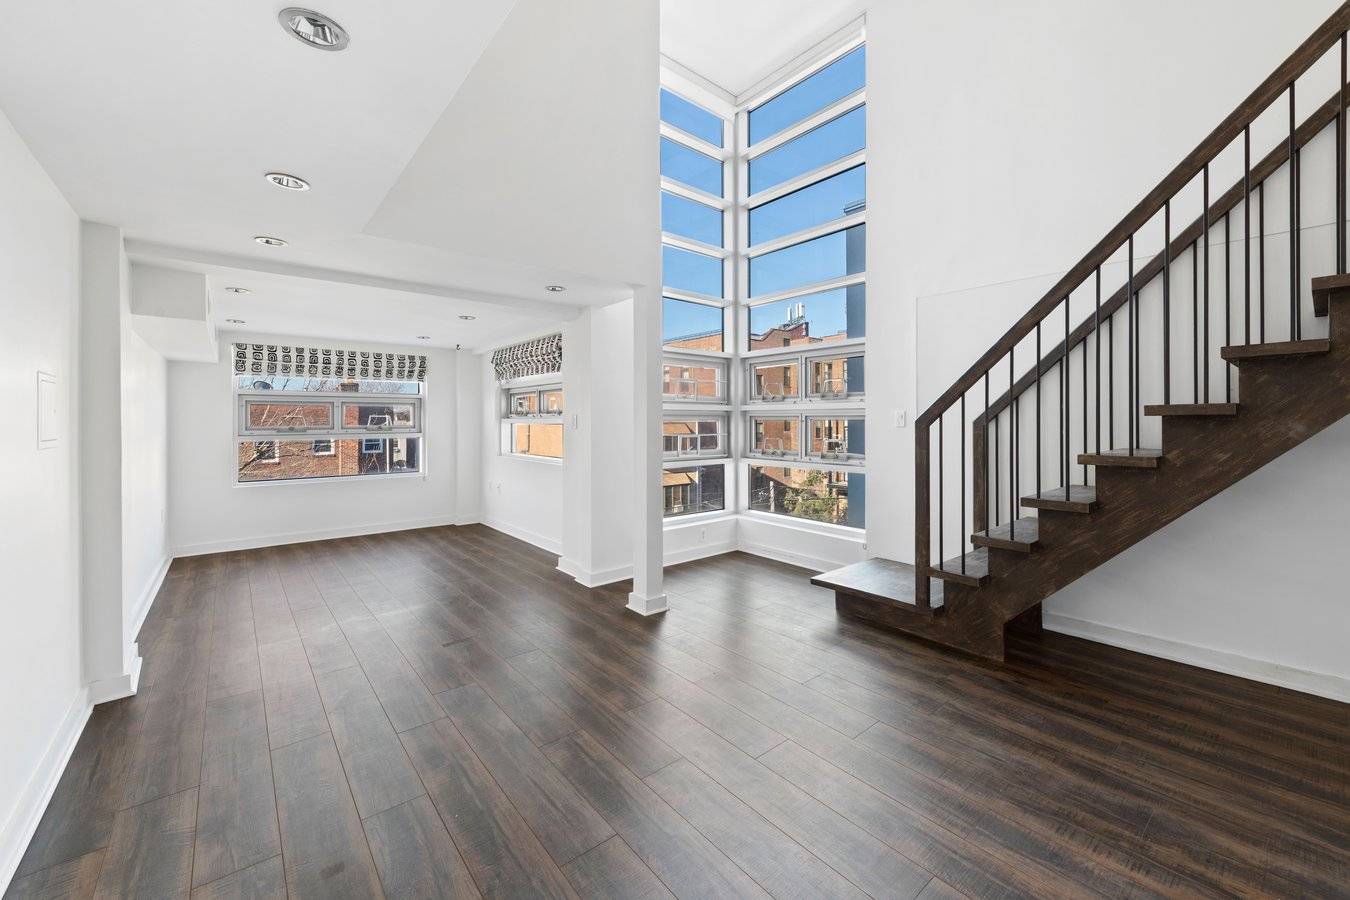 NEW TO THE MARKET ! ! ! NO FEEWelcome to Fusion, a five story 14 unit elevator boutique Condo located in sizzling South Park Slope.